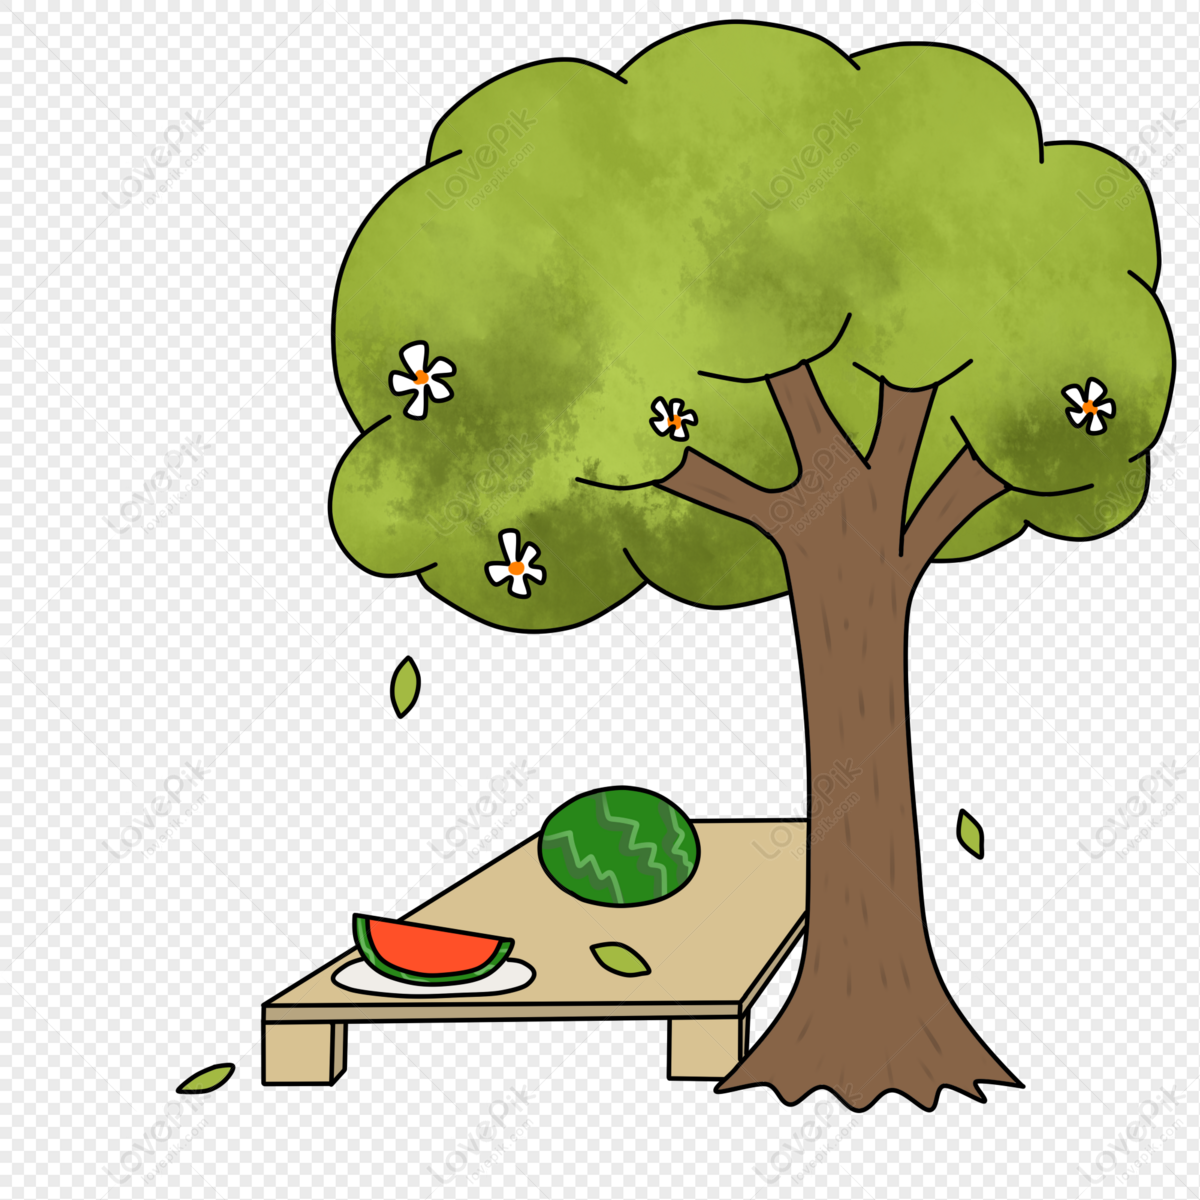 Under The Tree Shade And Watermelon PNG Transparent Background And Clipart  Image For Free Download - Lovepik | 401424550